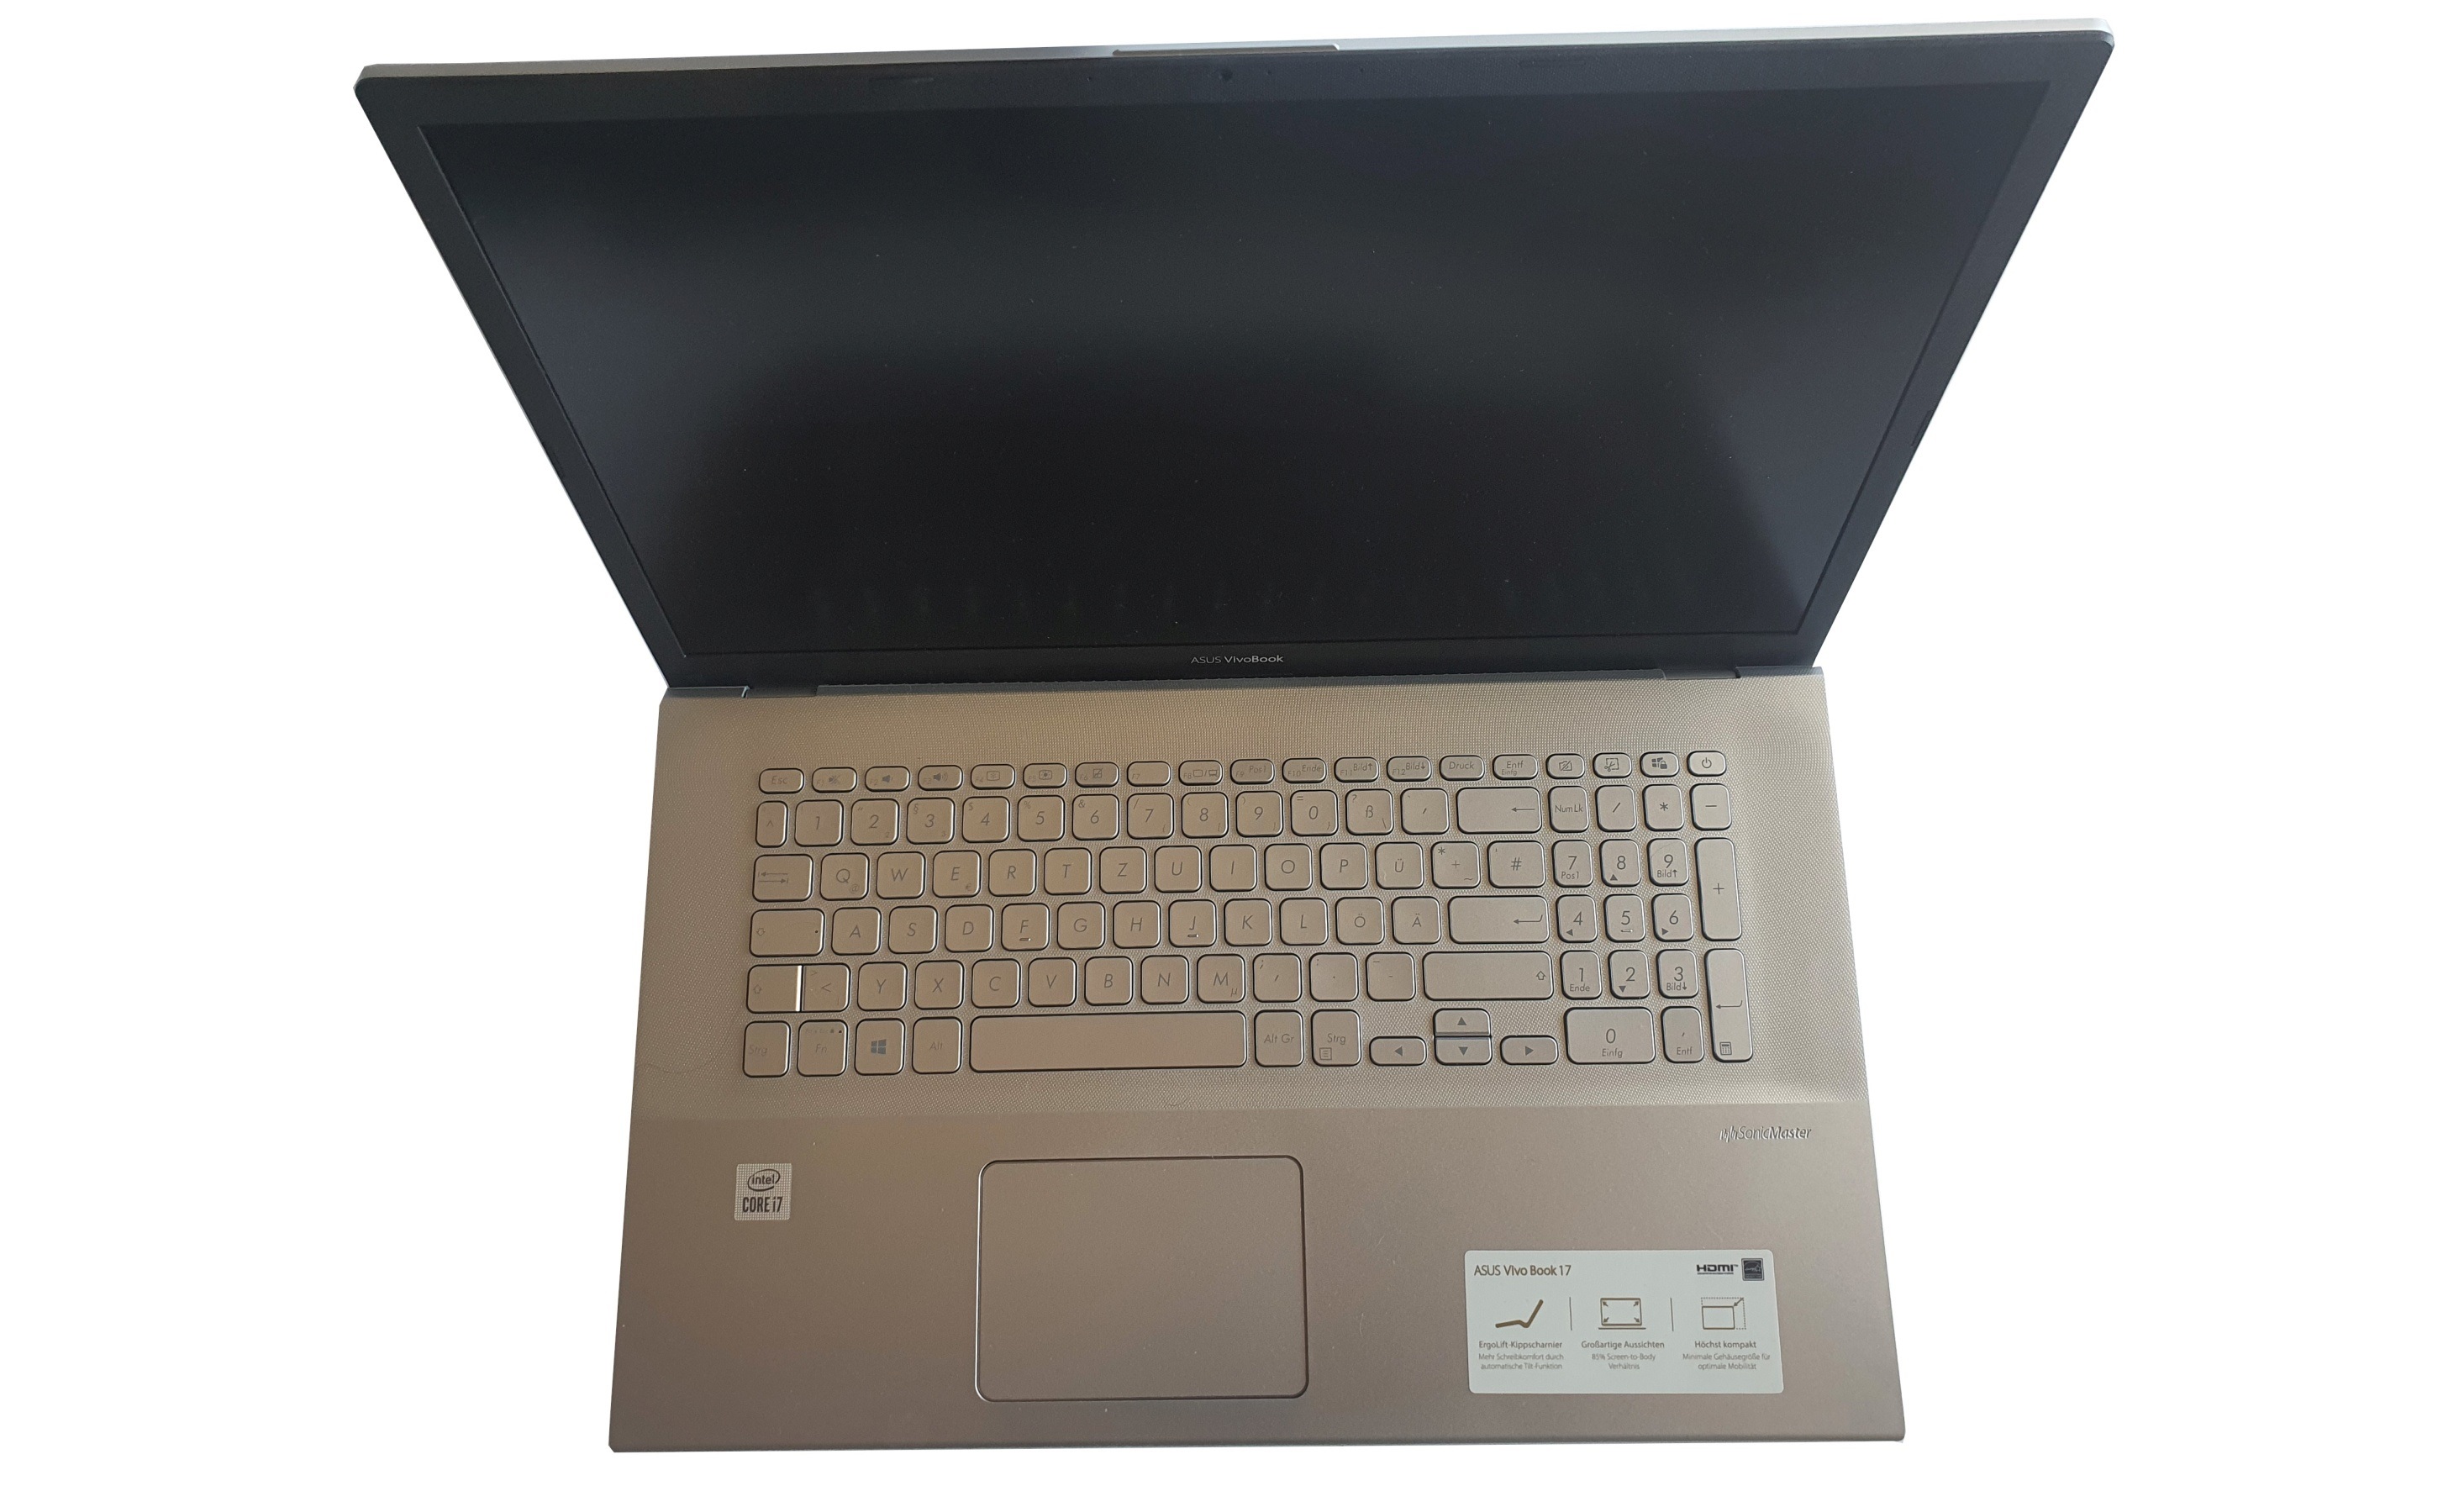 Asus VivoBook 17 (F712JA) test: Affordable 17-inch laptop with semi-passive  cooling -  News